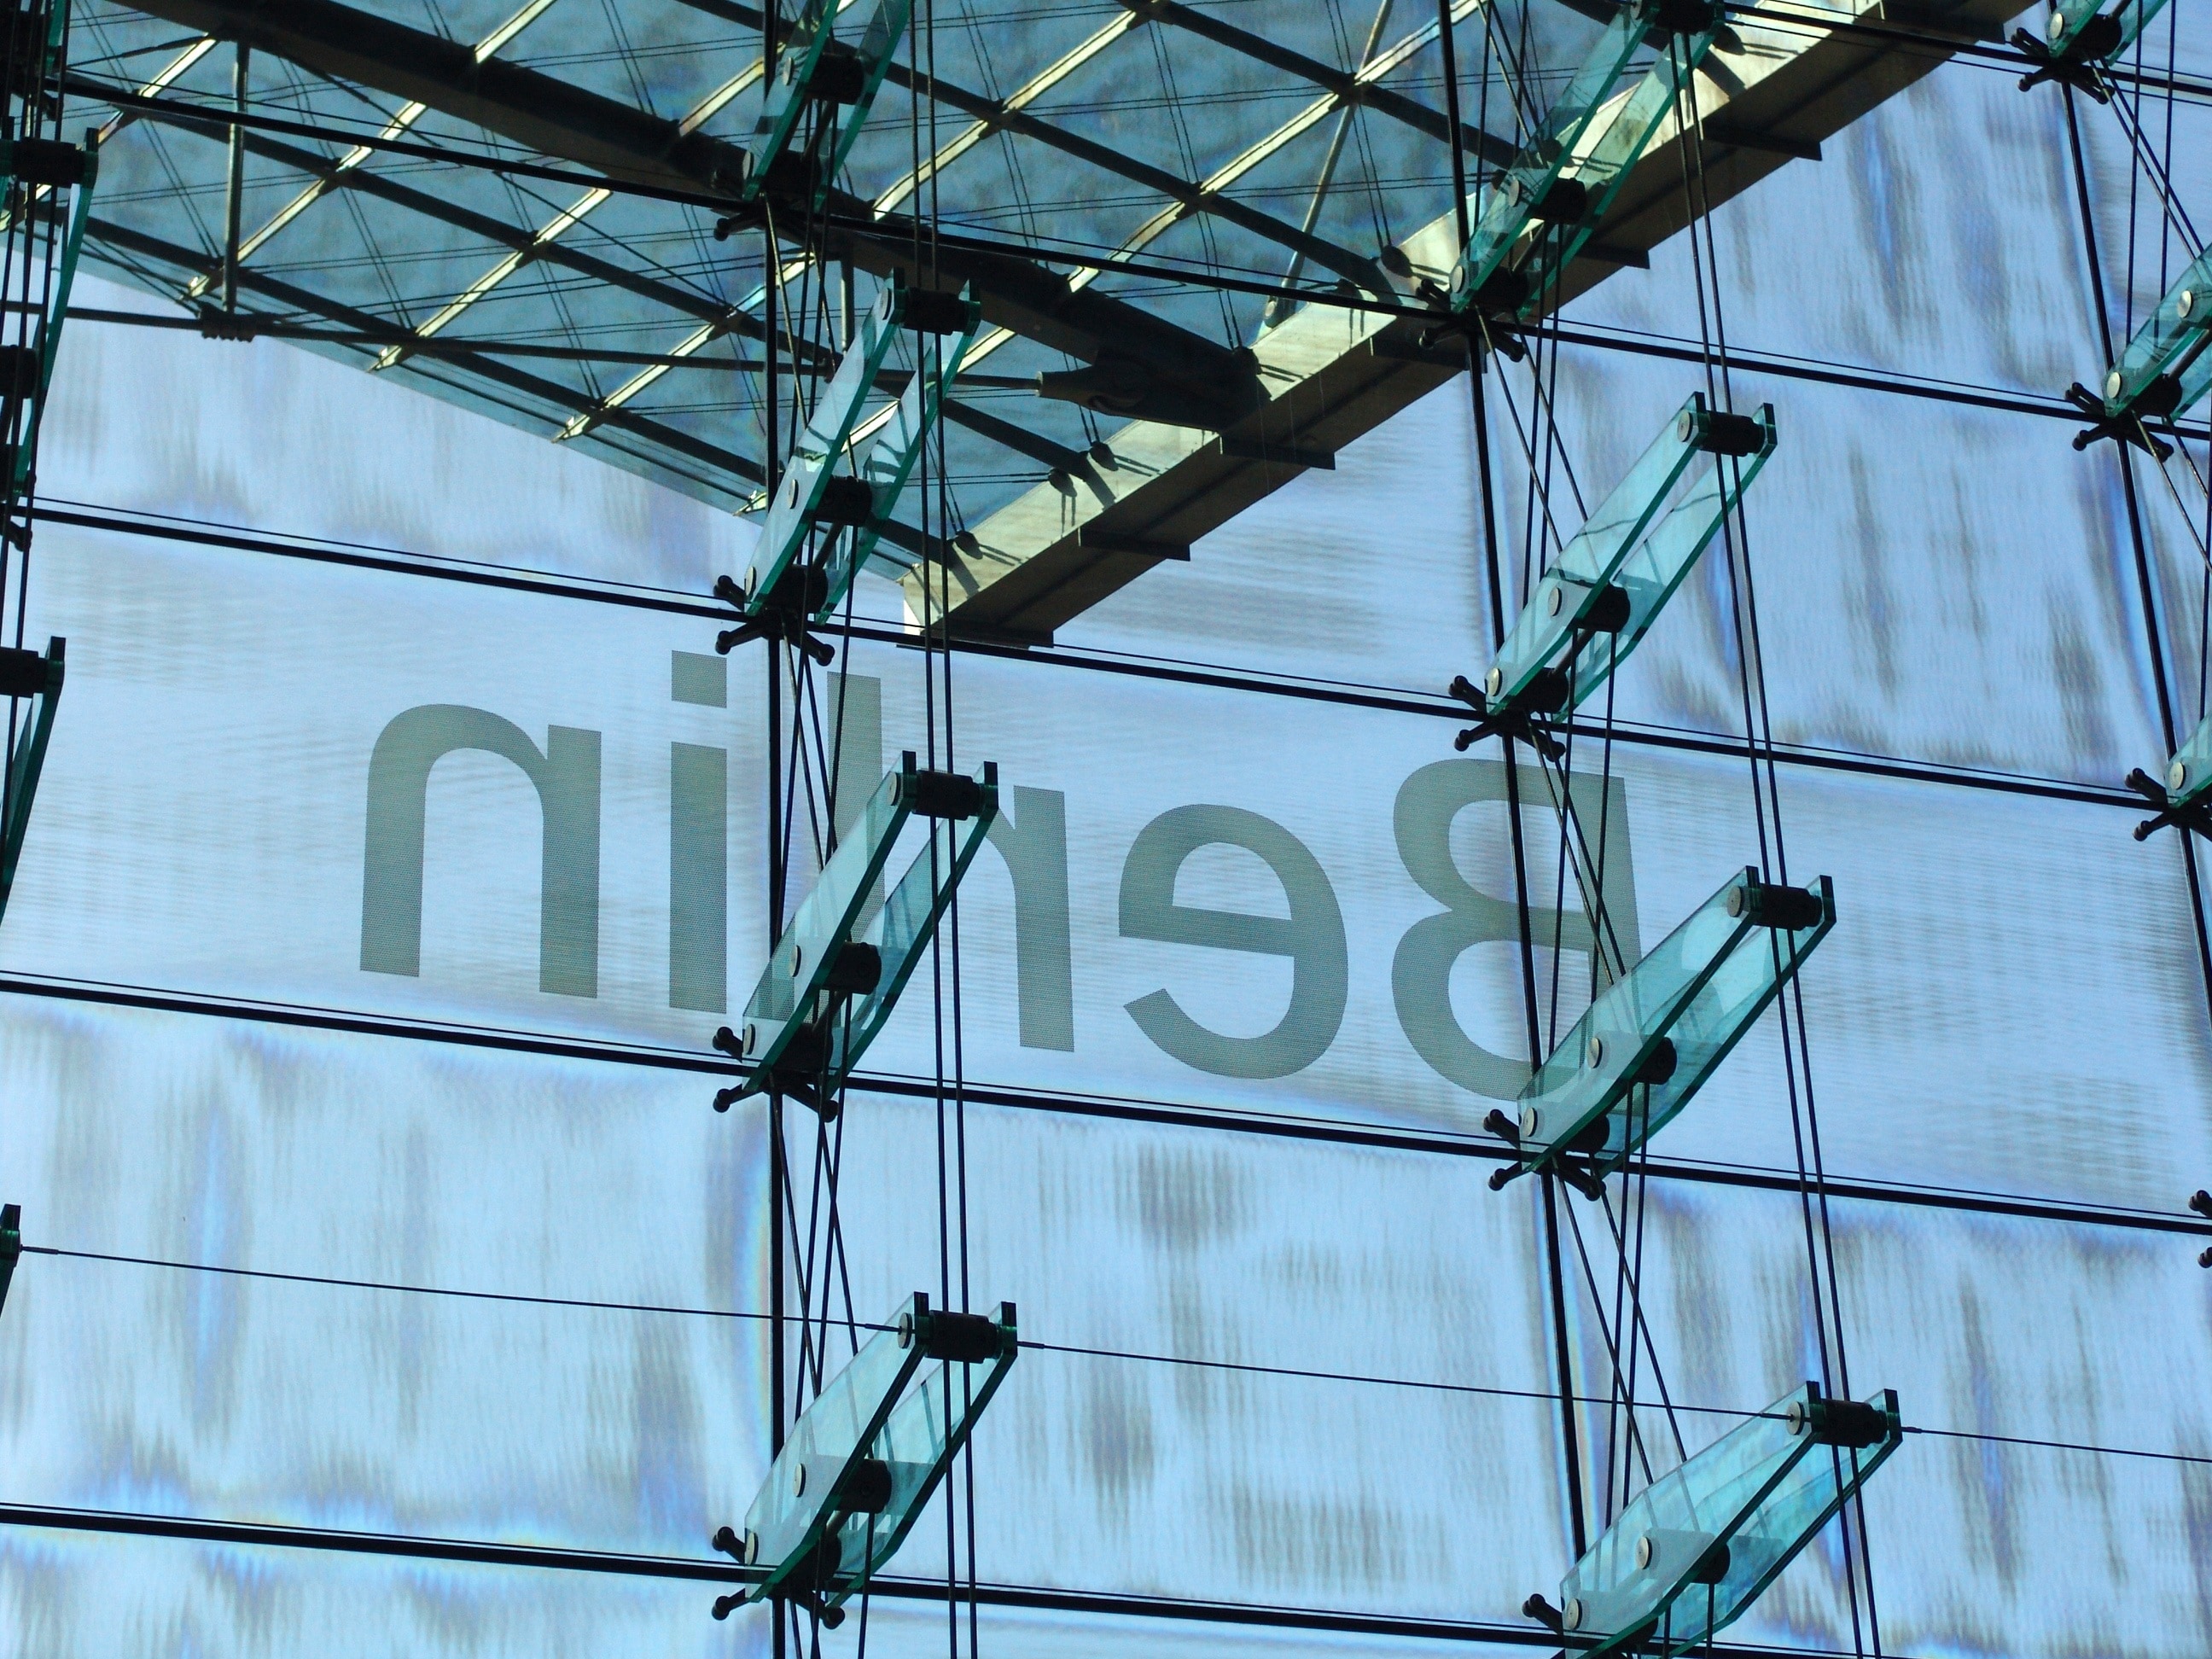 Berlin, Facade, Central Station, Glass, text, communication